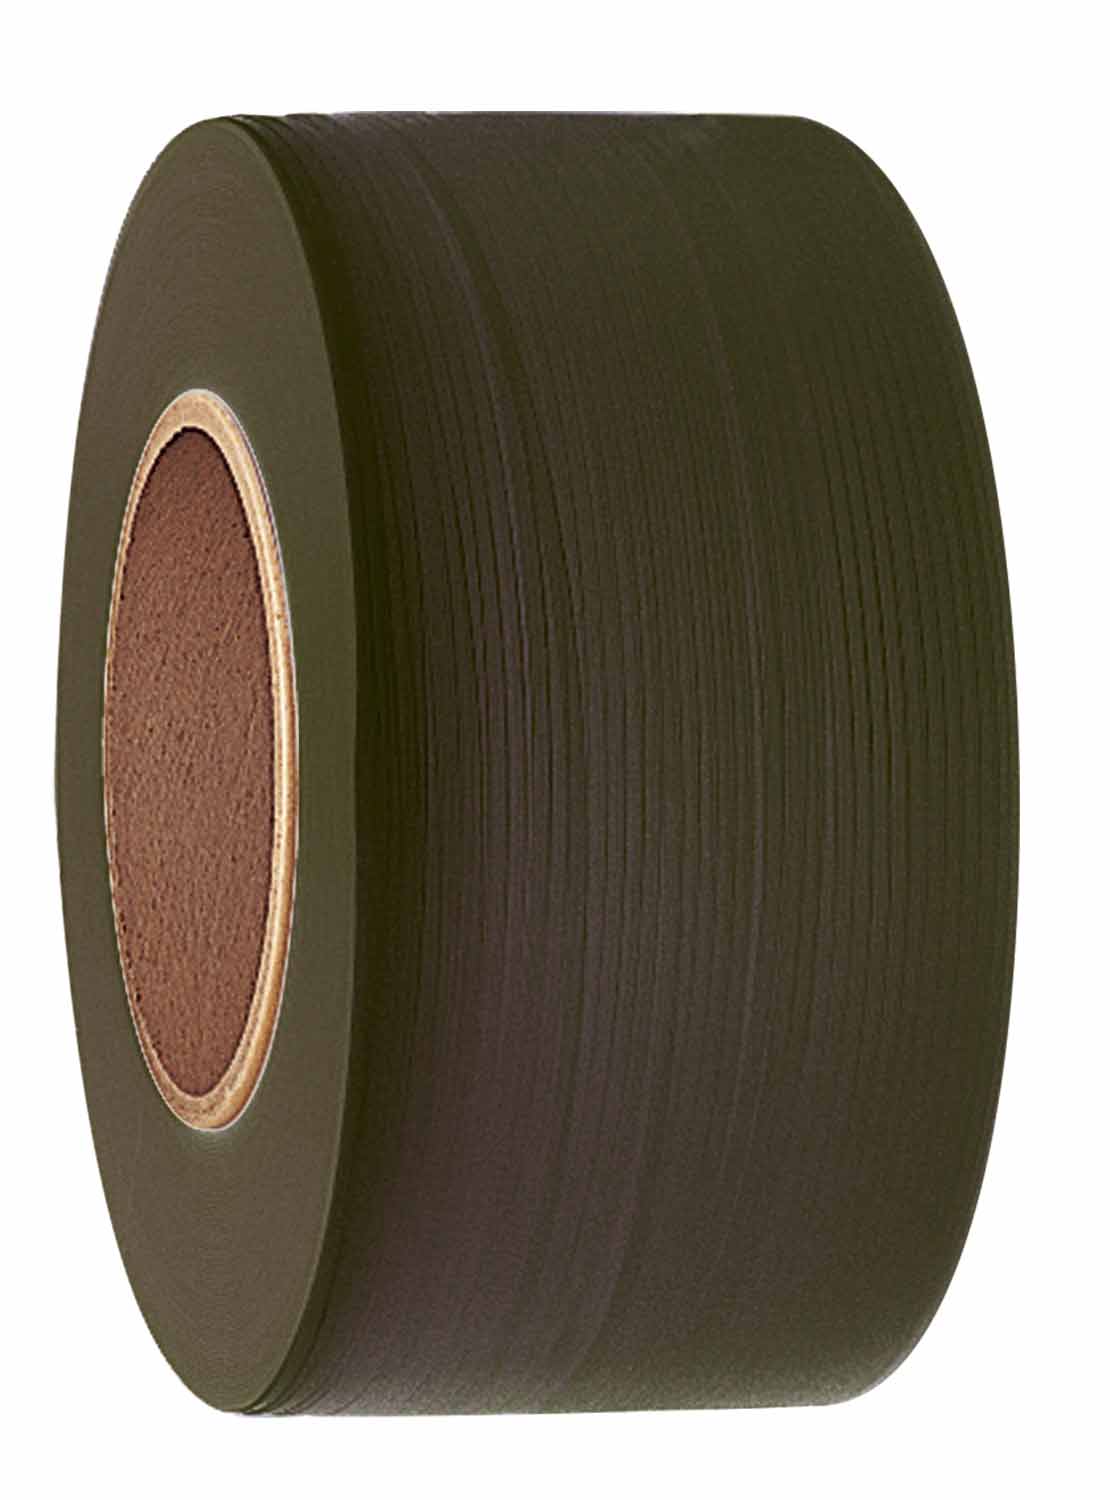 PLASTIC STRAPPING BLACK 3/8&quot;
300 LB. 8X8 POLYPROPYLENE
SIGNODE CONTRAX